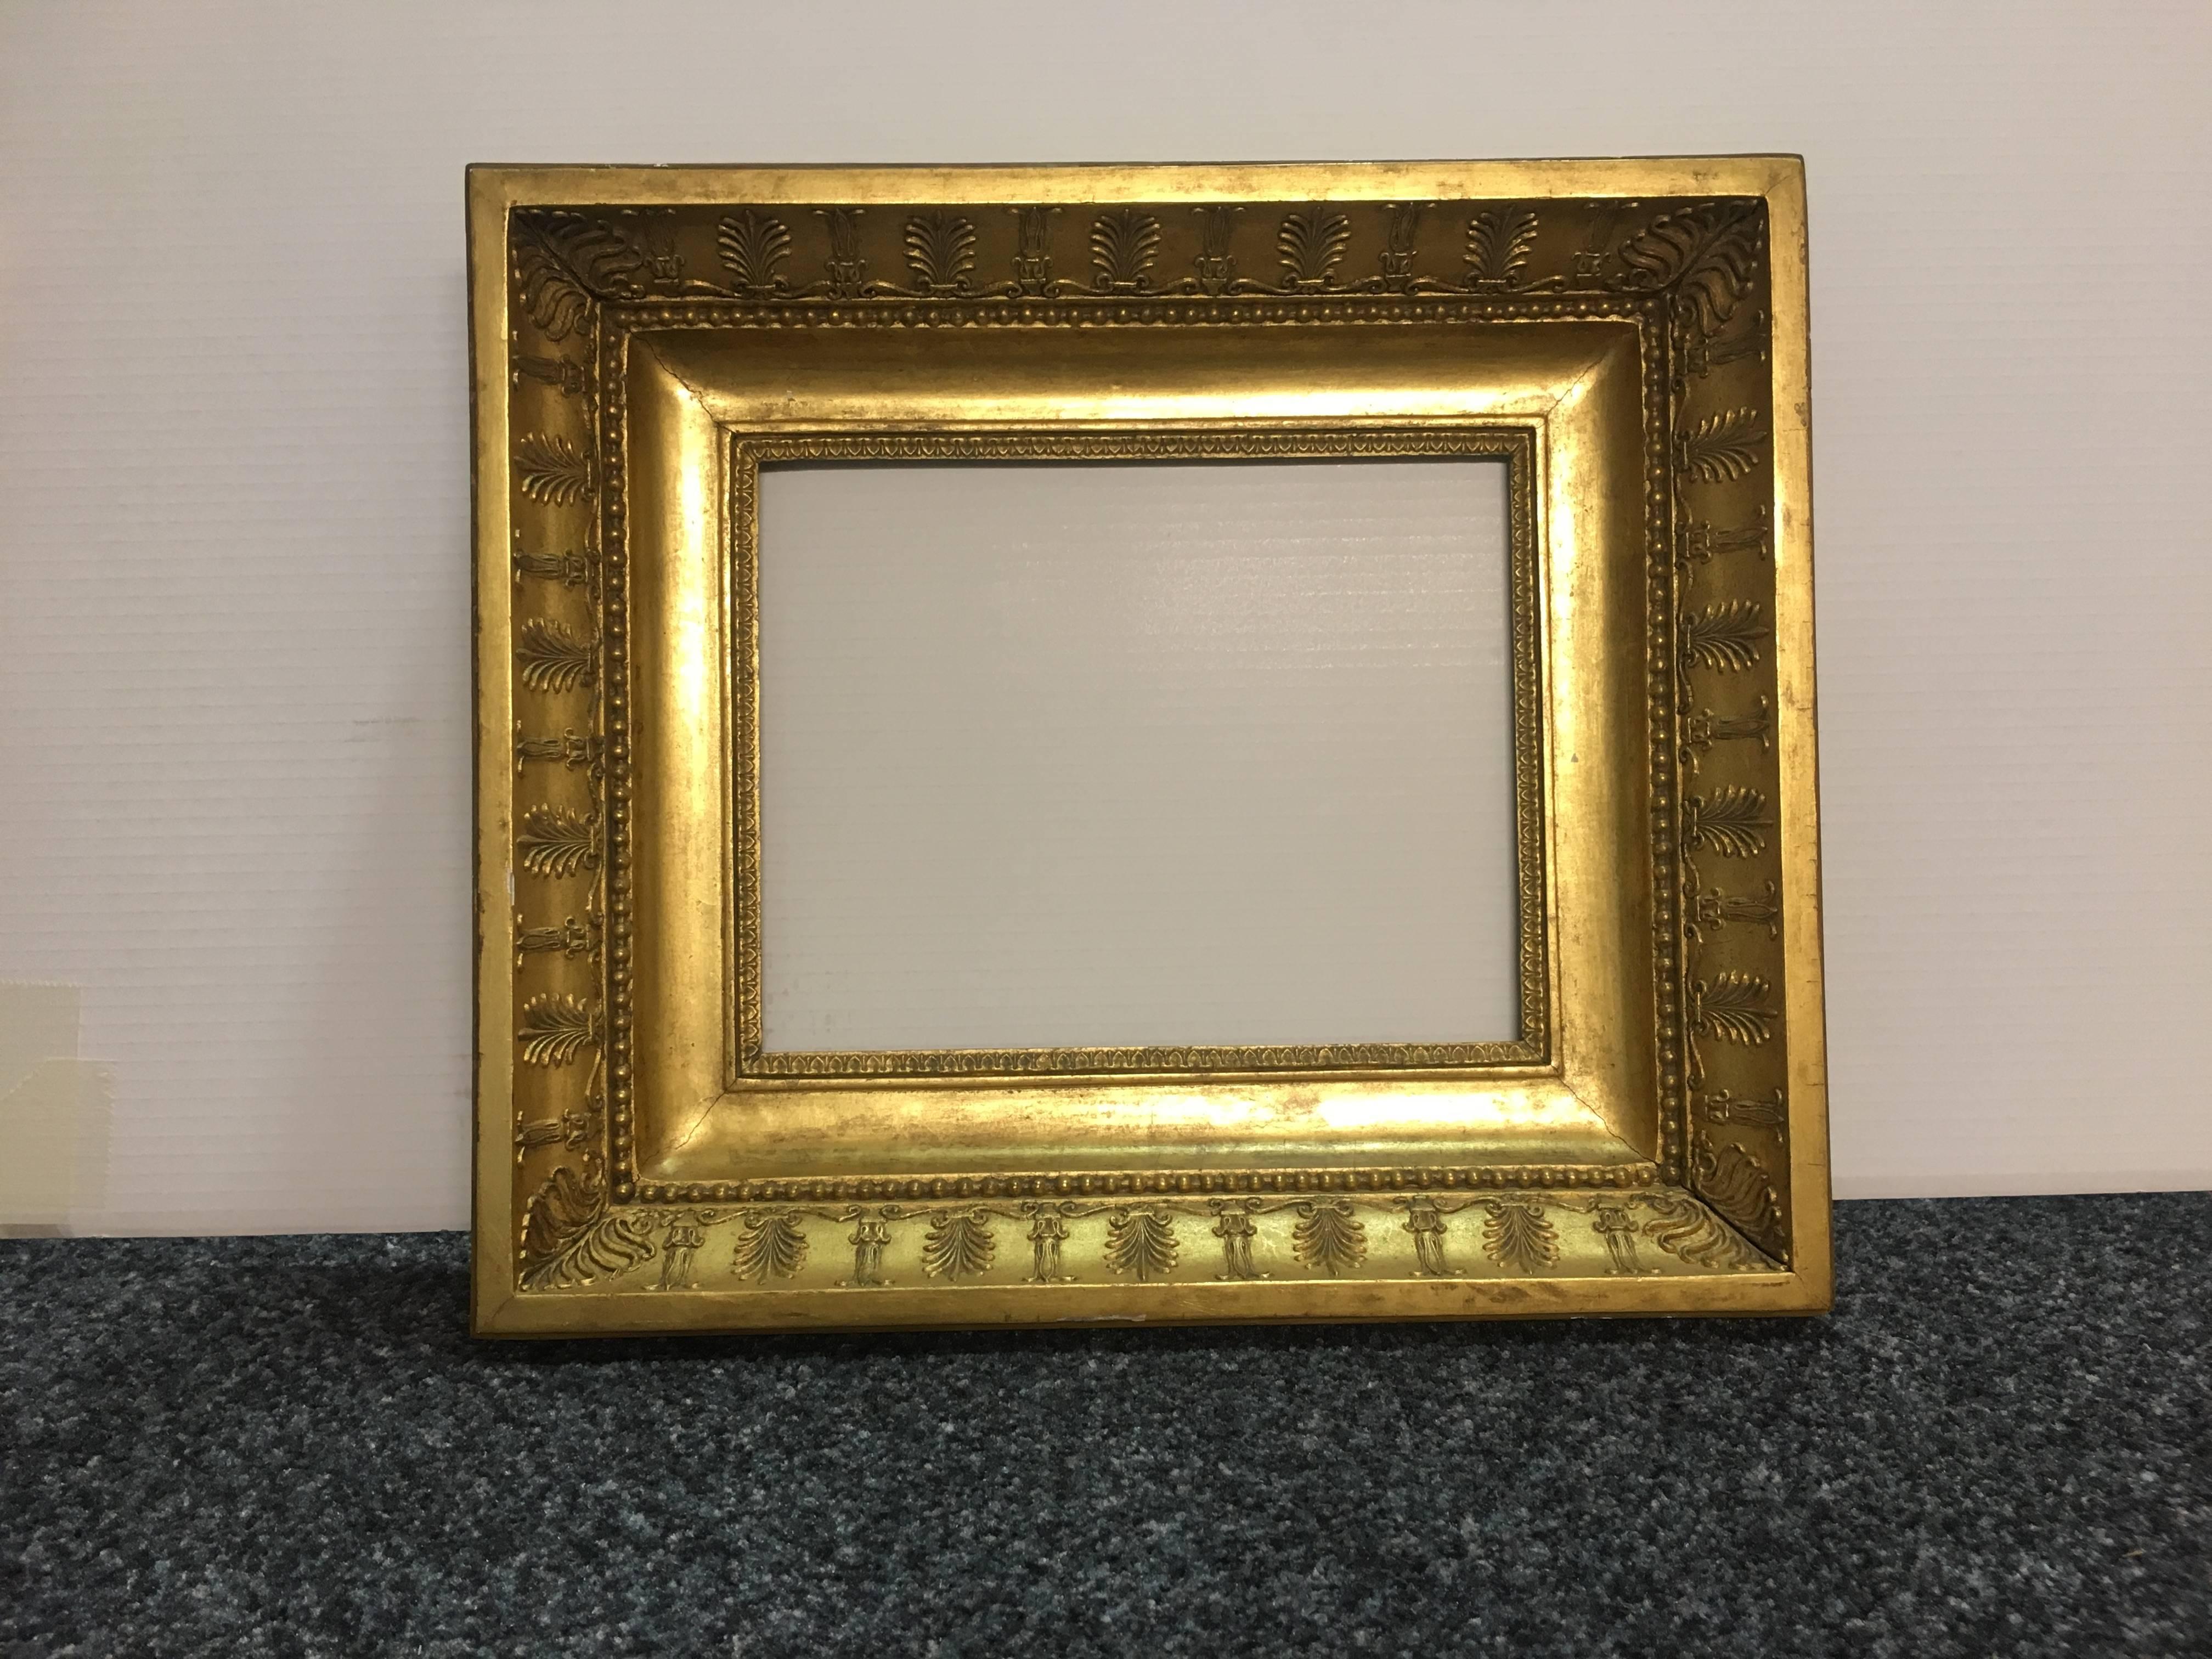 Late 19th century Italian neoclassical wood frame with gold leaf cover
Measure: cm.41.5 x 7.5 x 36 (internal cm26 x 20.5).